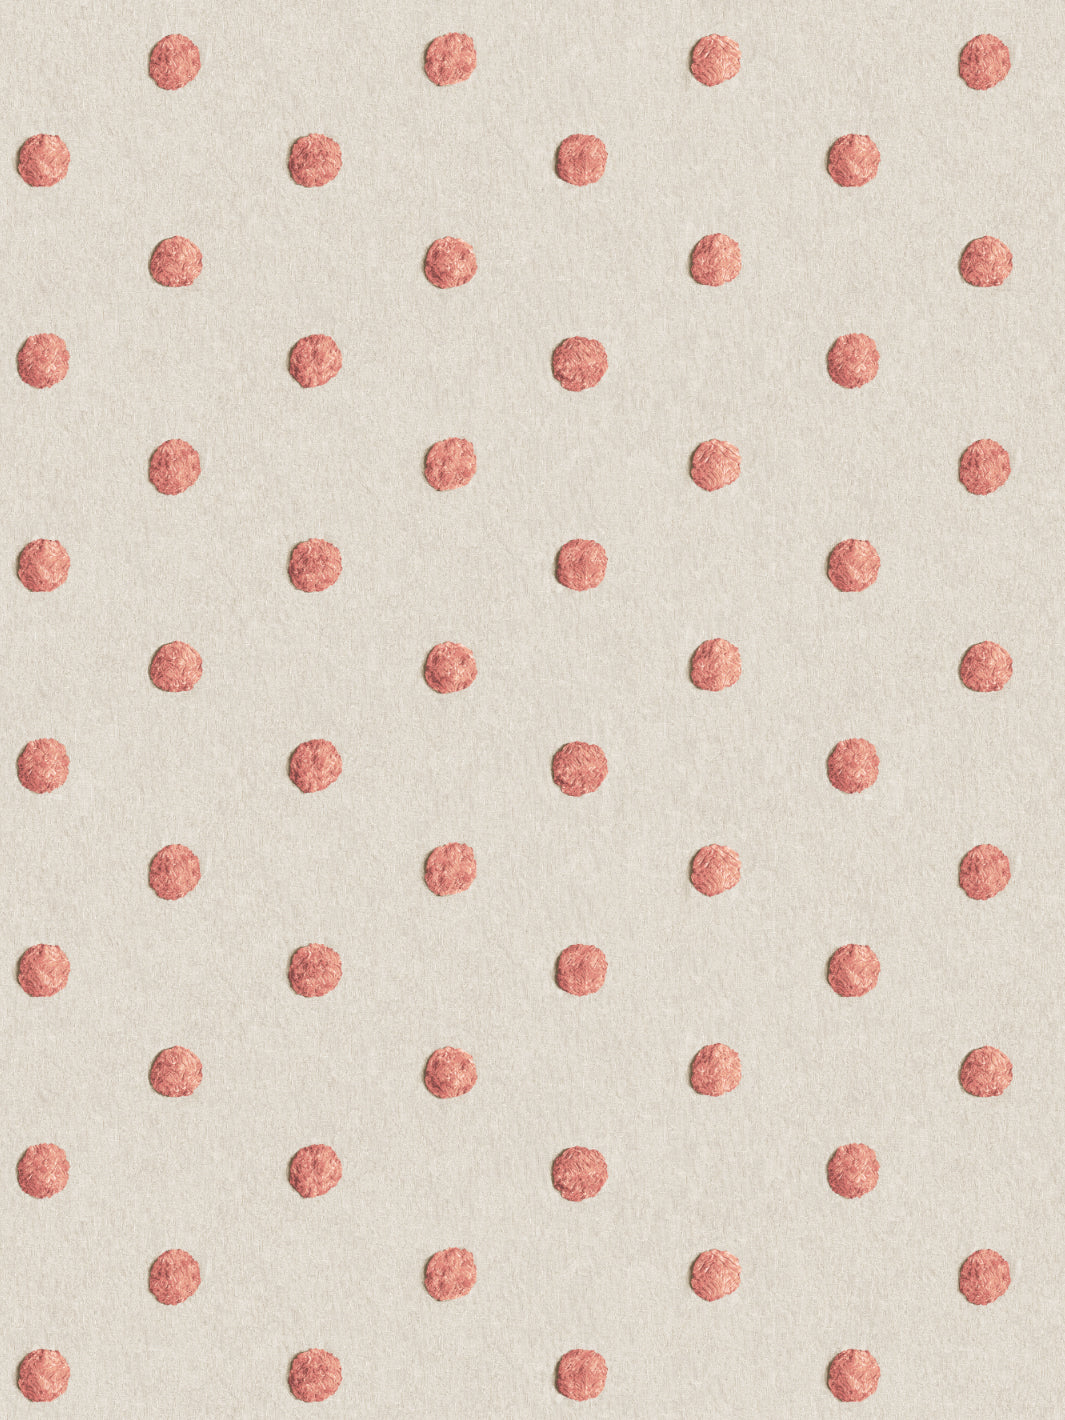 'Chenille Dots Small' Wallpaper by Chris Benz - Salmon